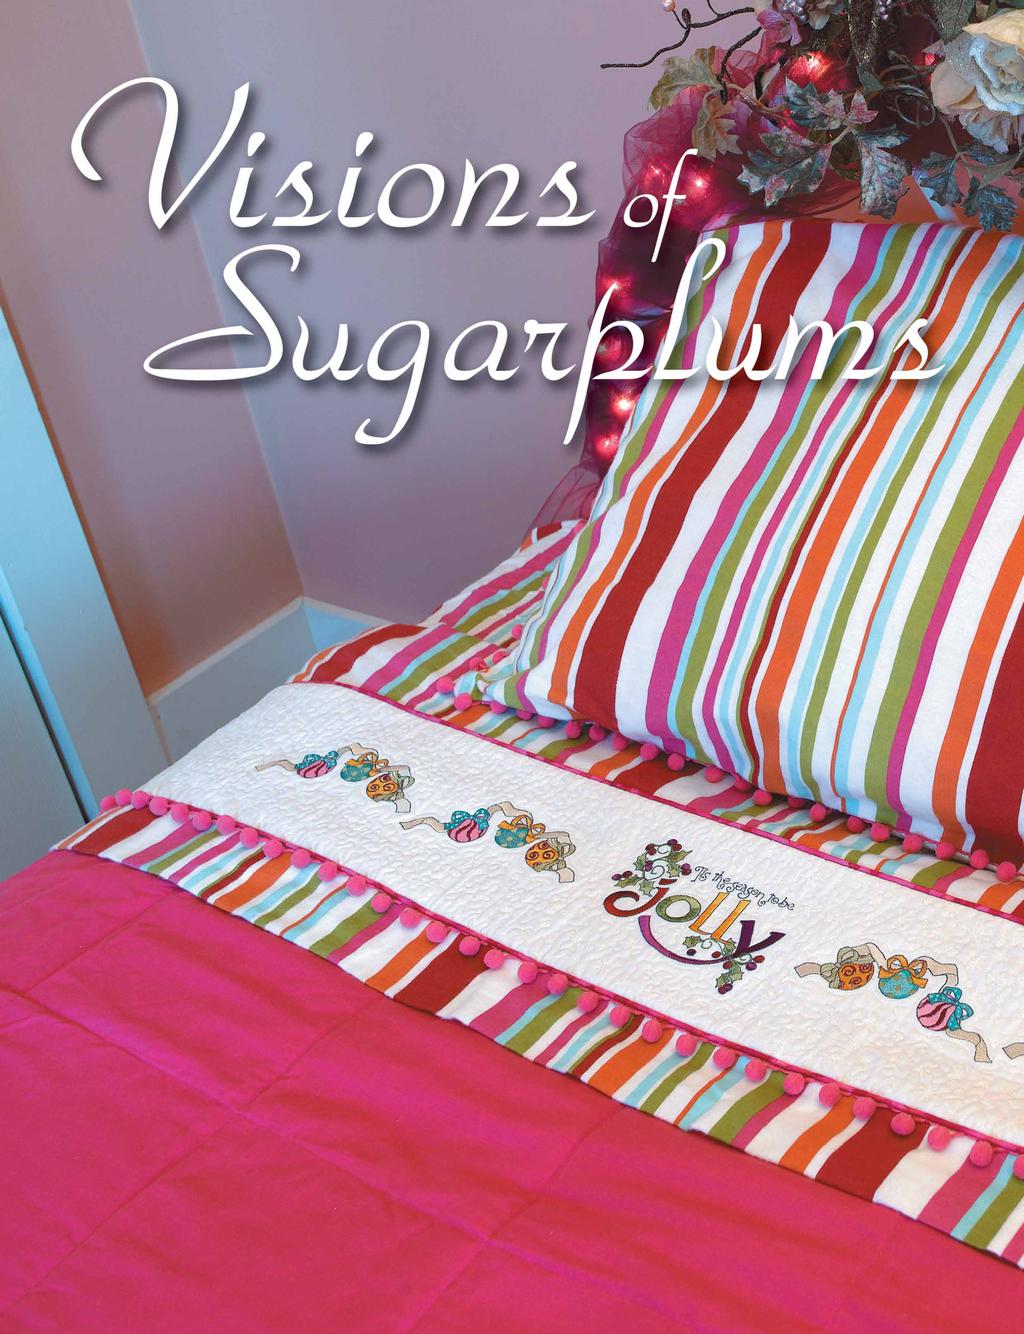 By Jennifer Gigas Snuggled beneath these holiday flannel sheets, visions of sugarplums will no doubt be dancing through the dreams of your